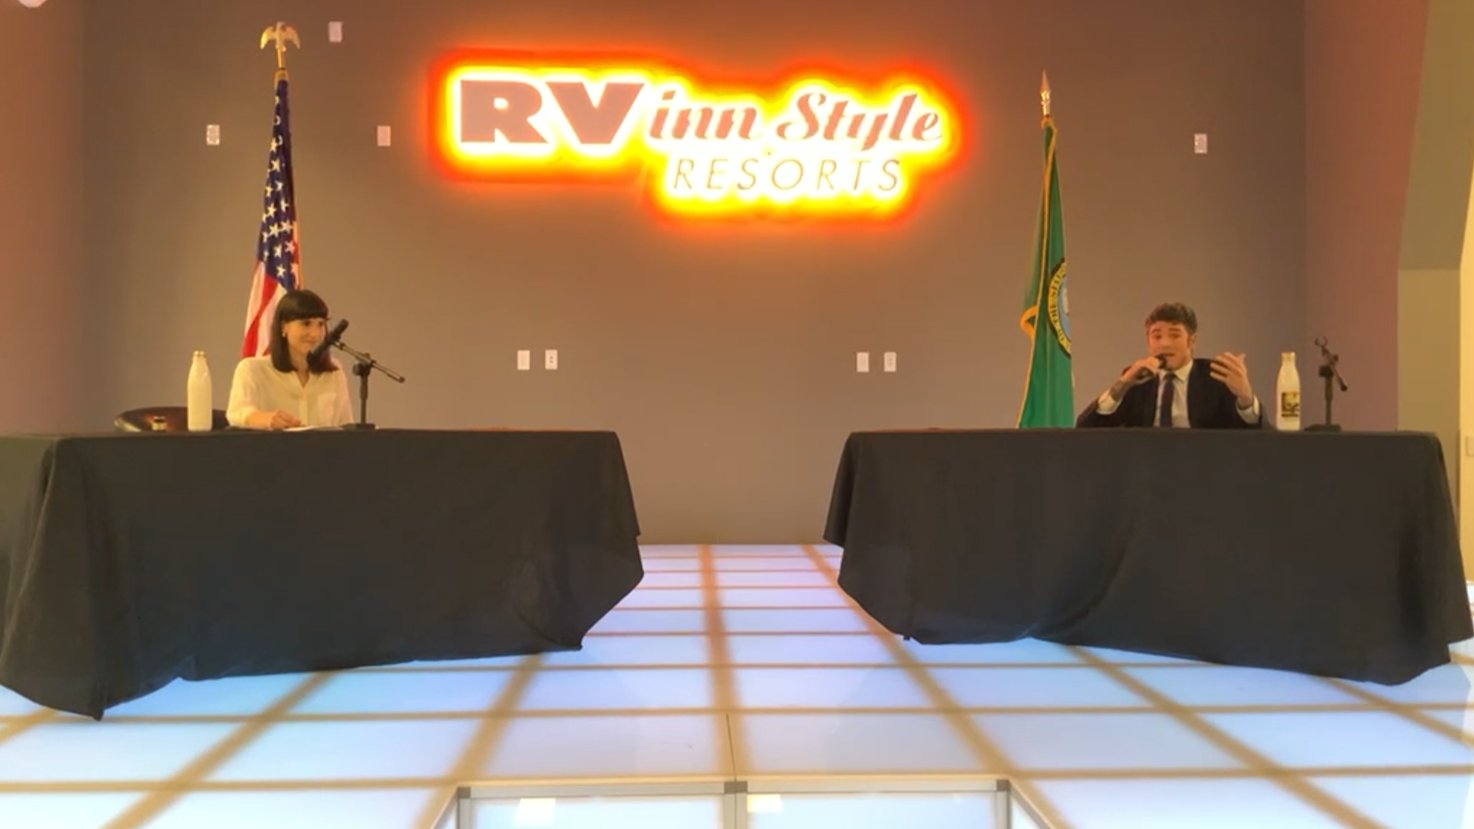 Hosted at the RV Inn Style Resorts convention center, Democrat Marie Gluesenkamp Perez faced off against Republican Joe Kent in a debate featuring topics ranging from the economy to foreign policy.